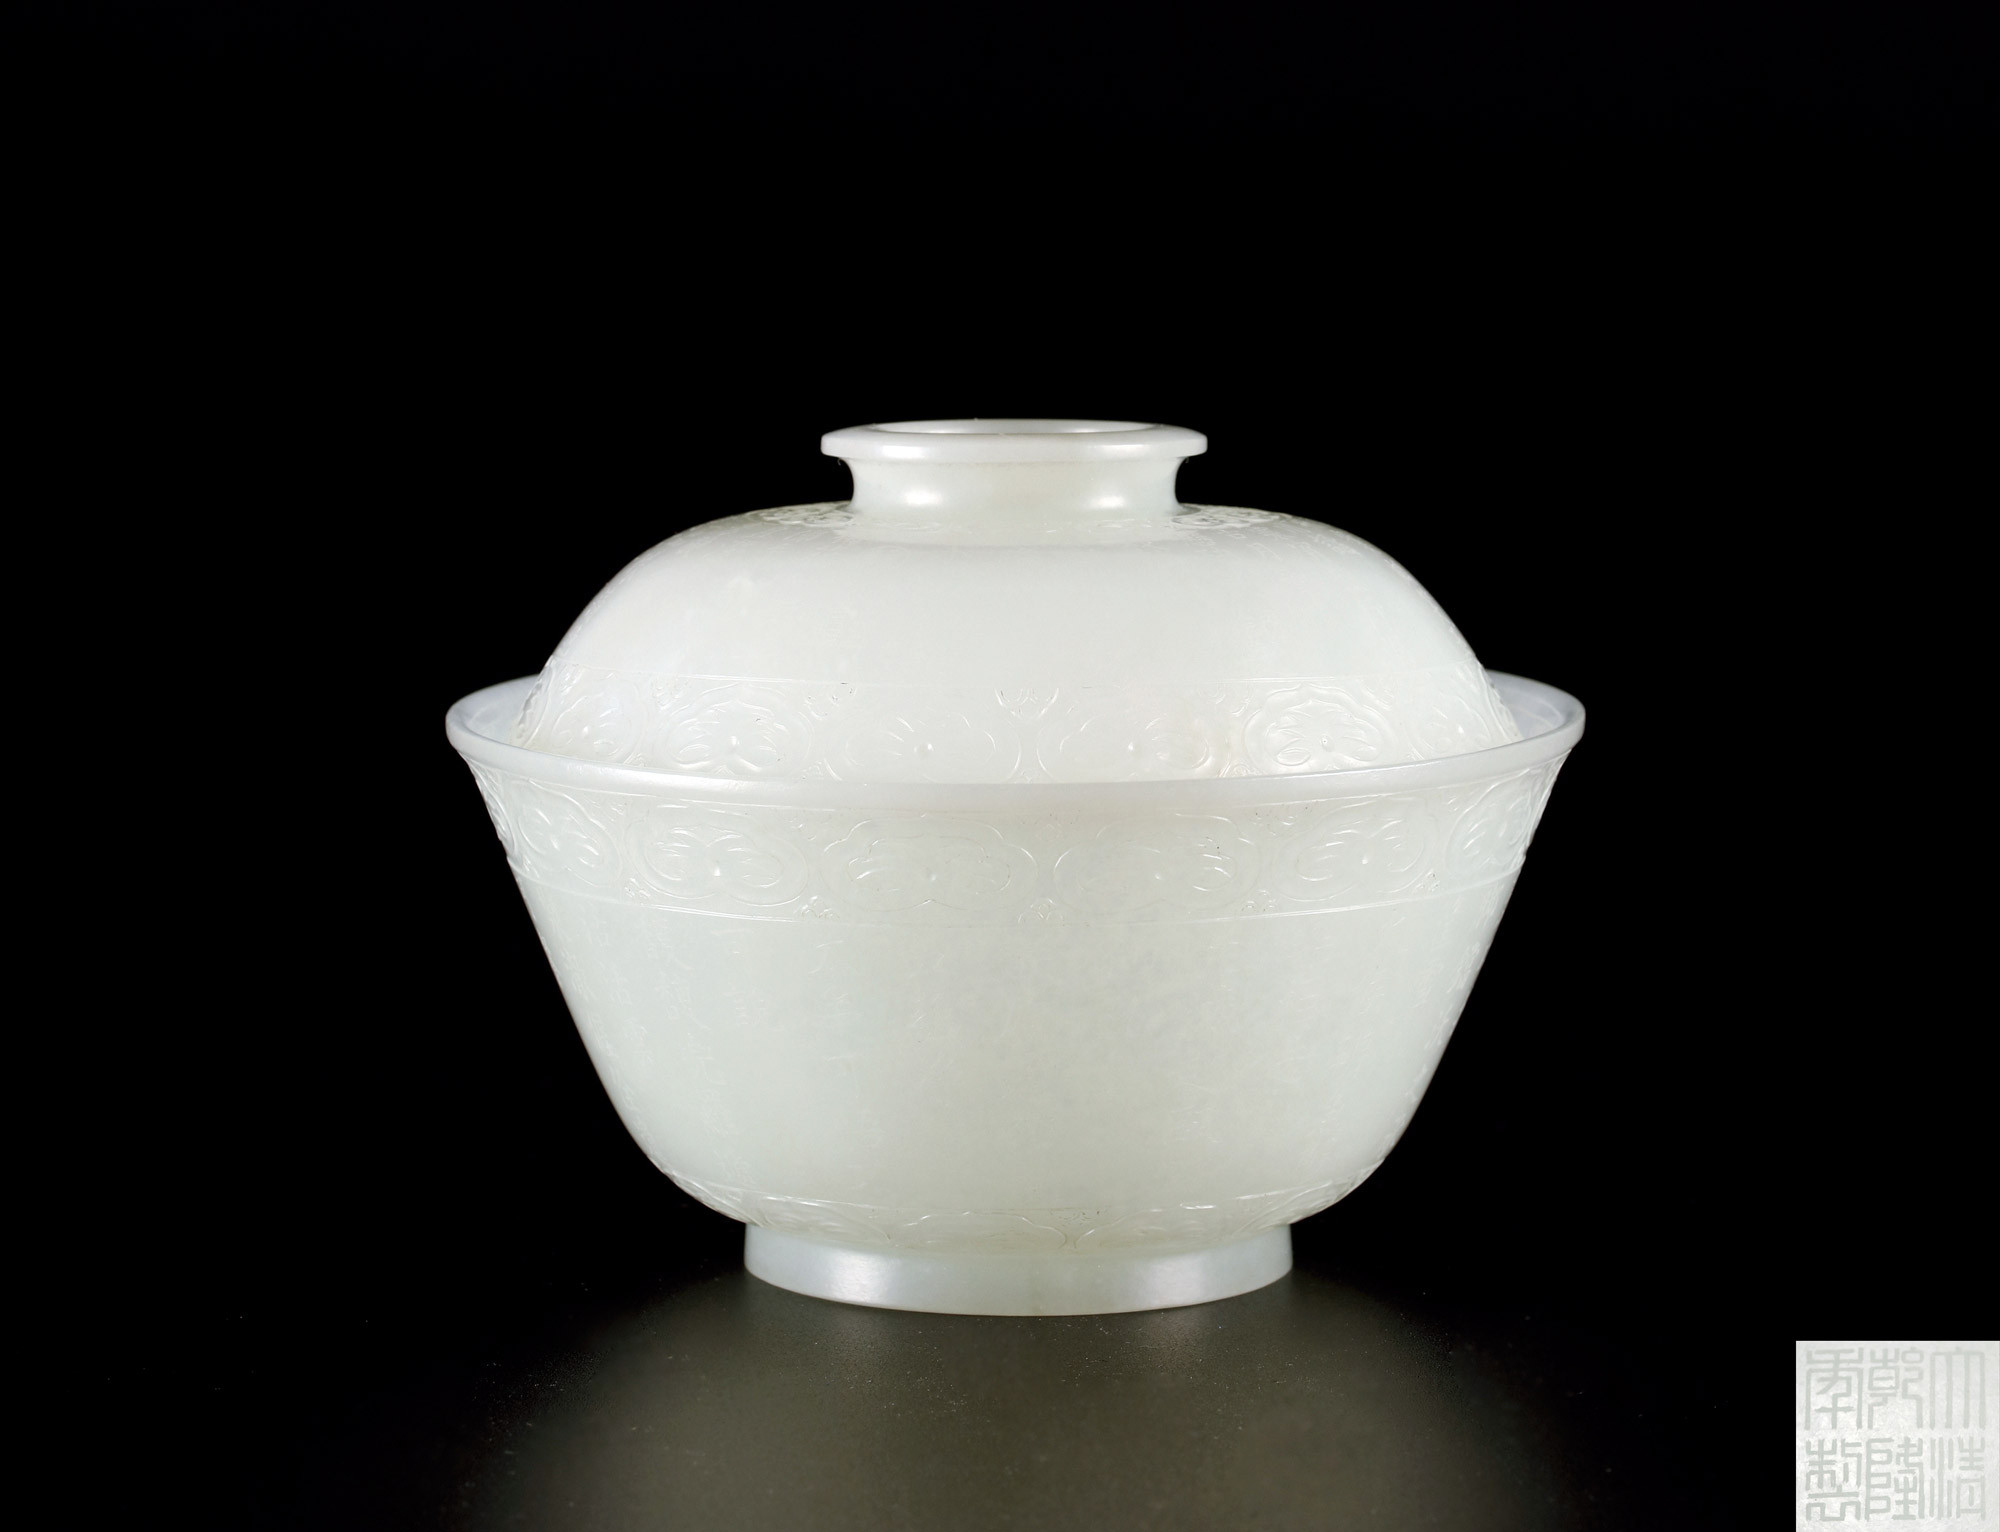 A VERY RARE IMPERIAL WHITE JADE CARVED "IMPERIAL INSCRPTION"BOWL WITH COVER